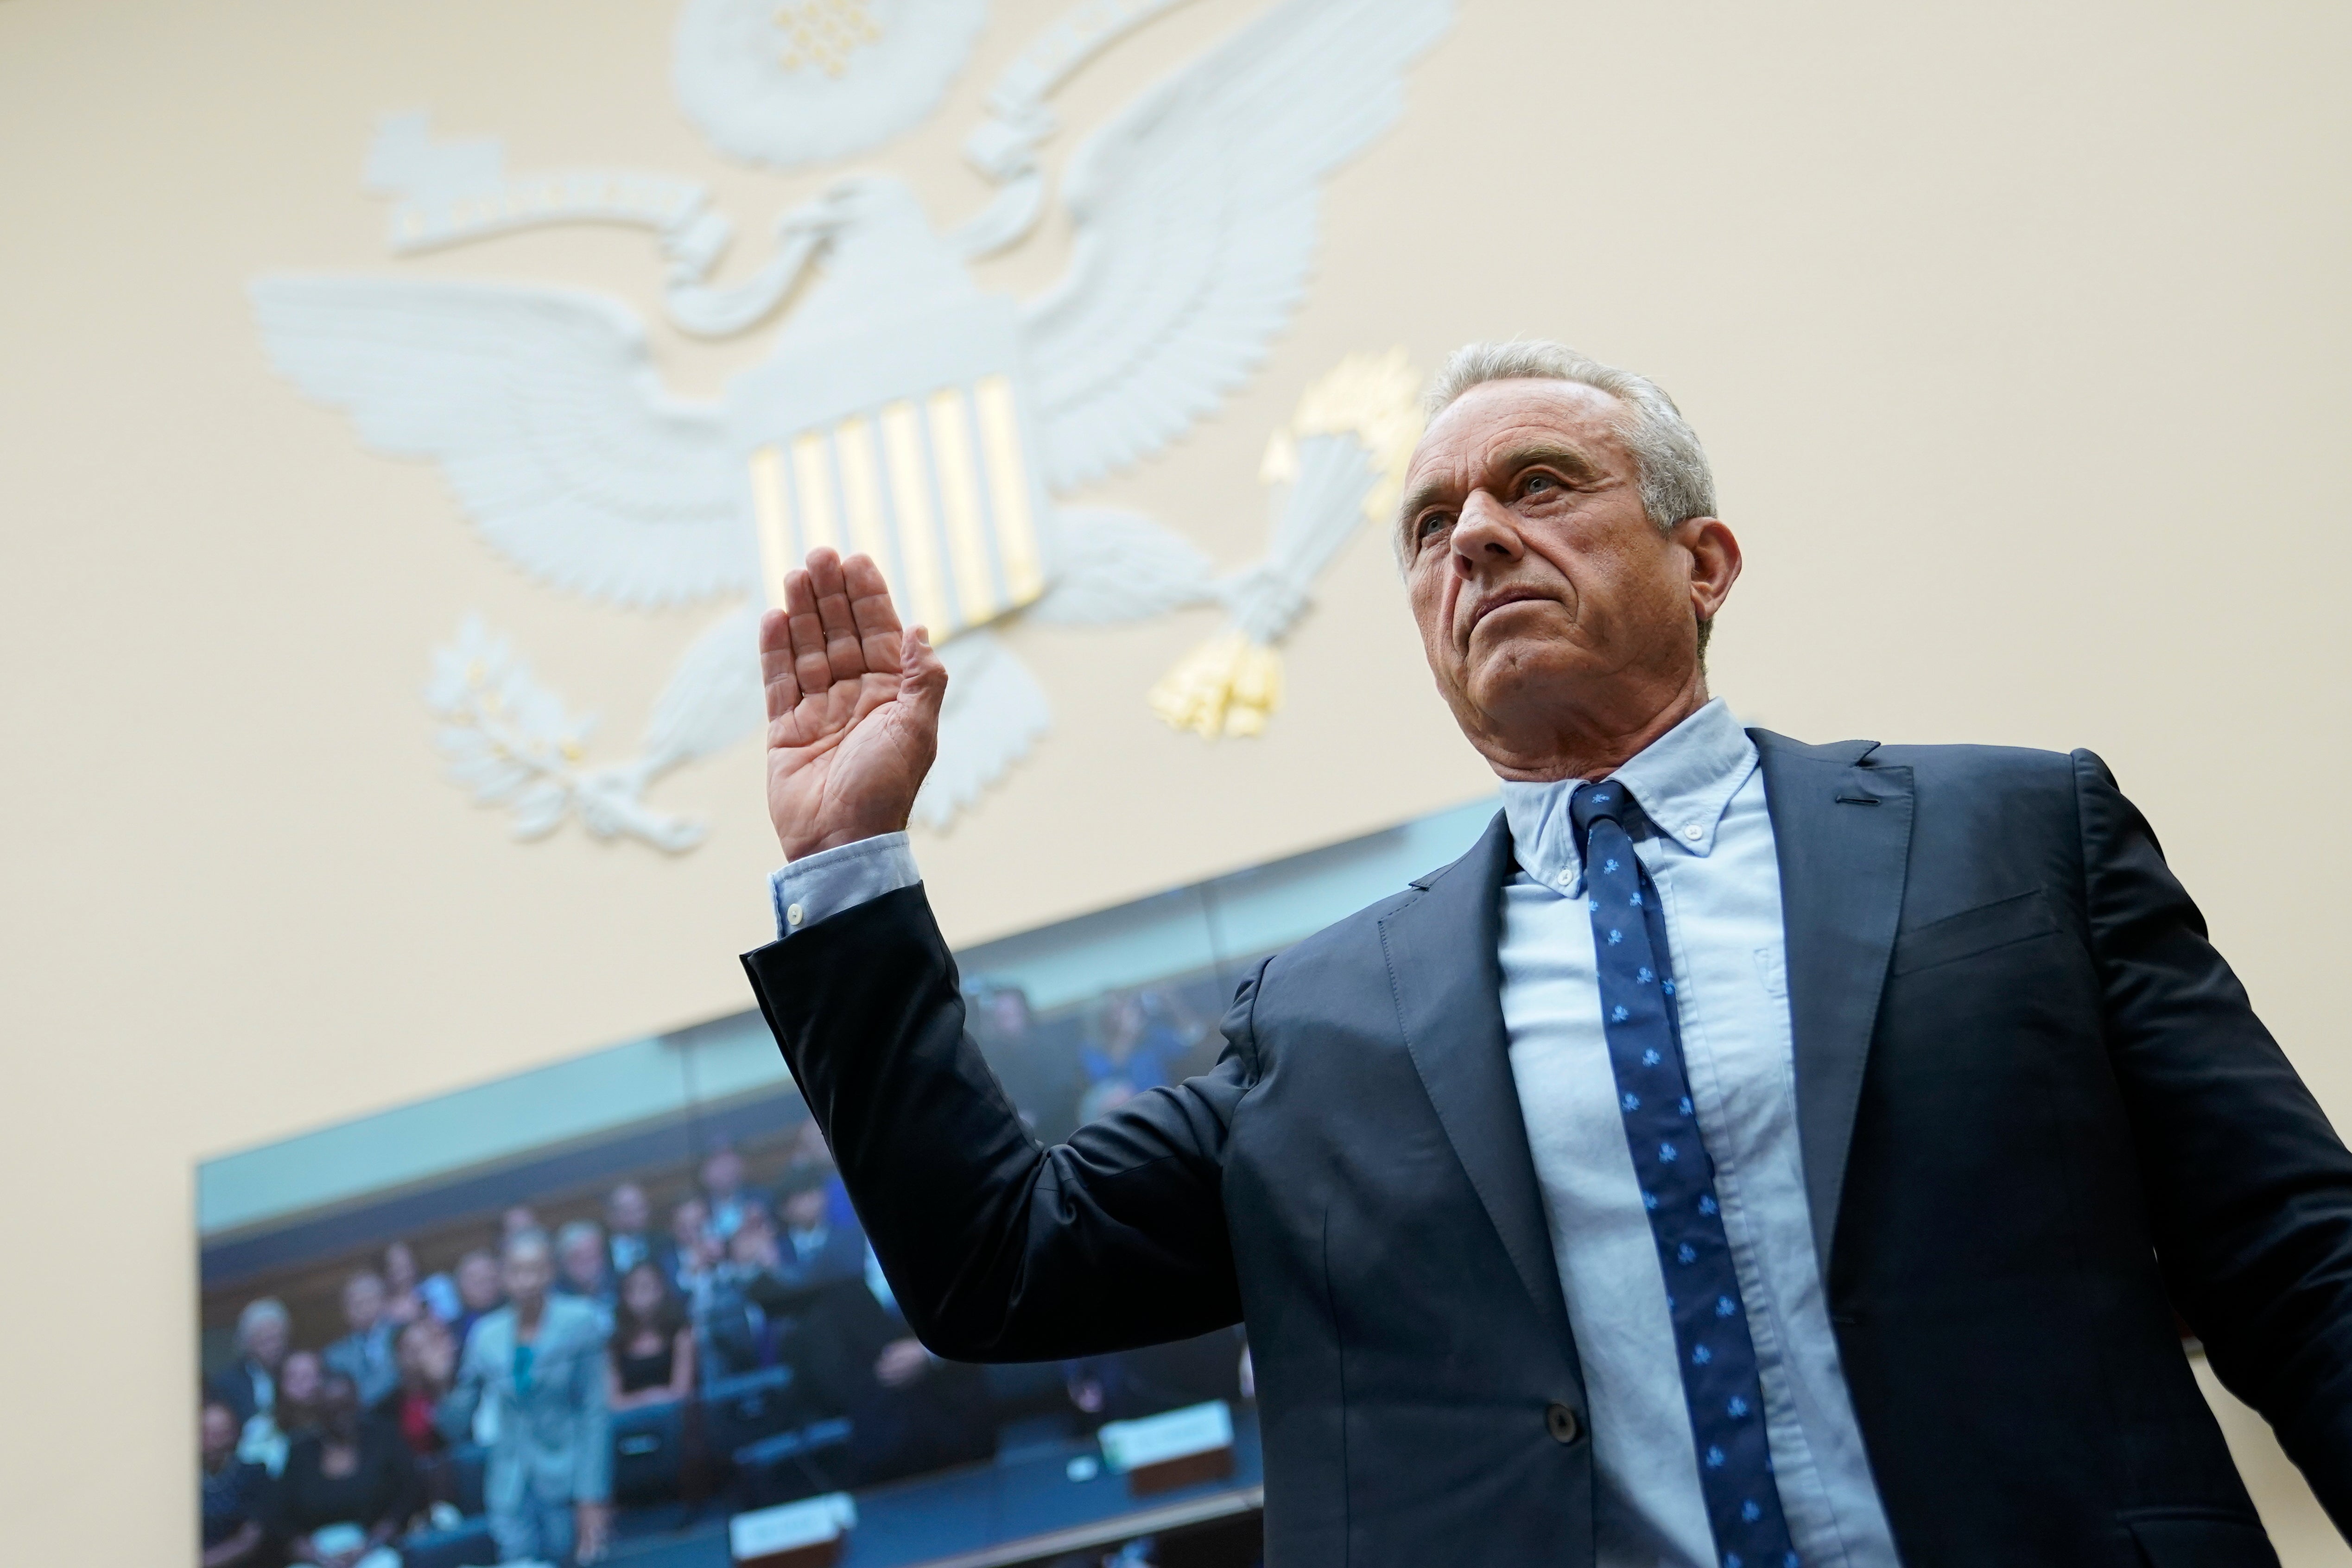 Robert F Kennedy, Jr., is sworn in before testifying at a House Judiciary Select Subcommittee on the Weaponization of the Federal Government in July